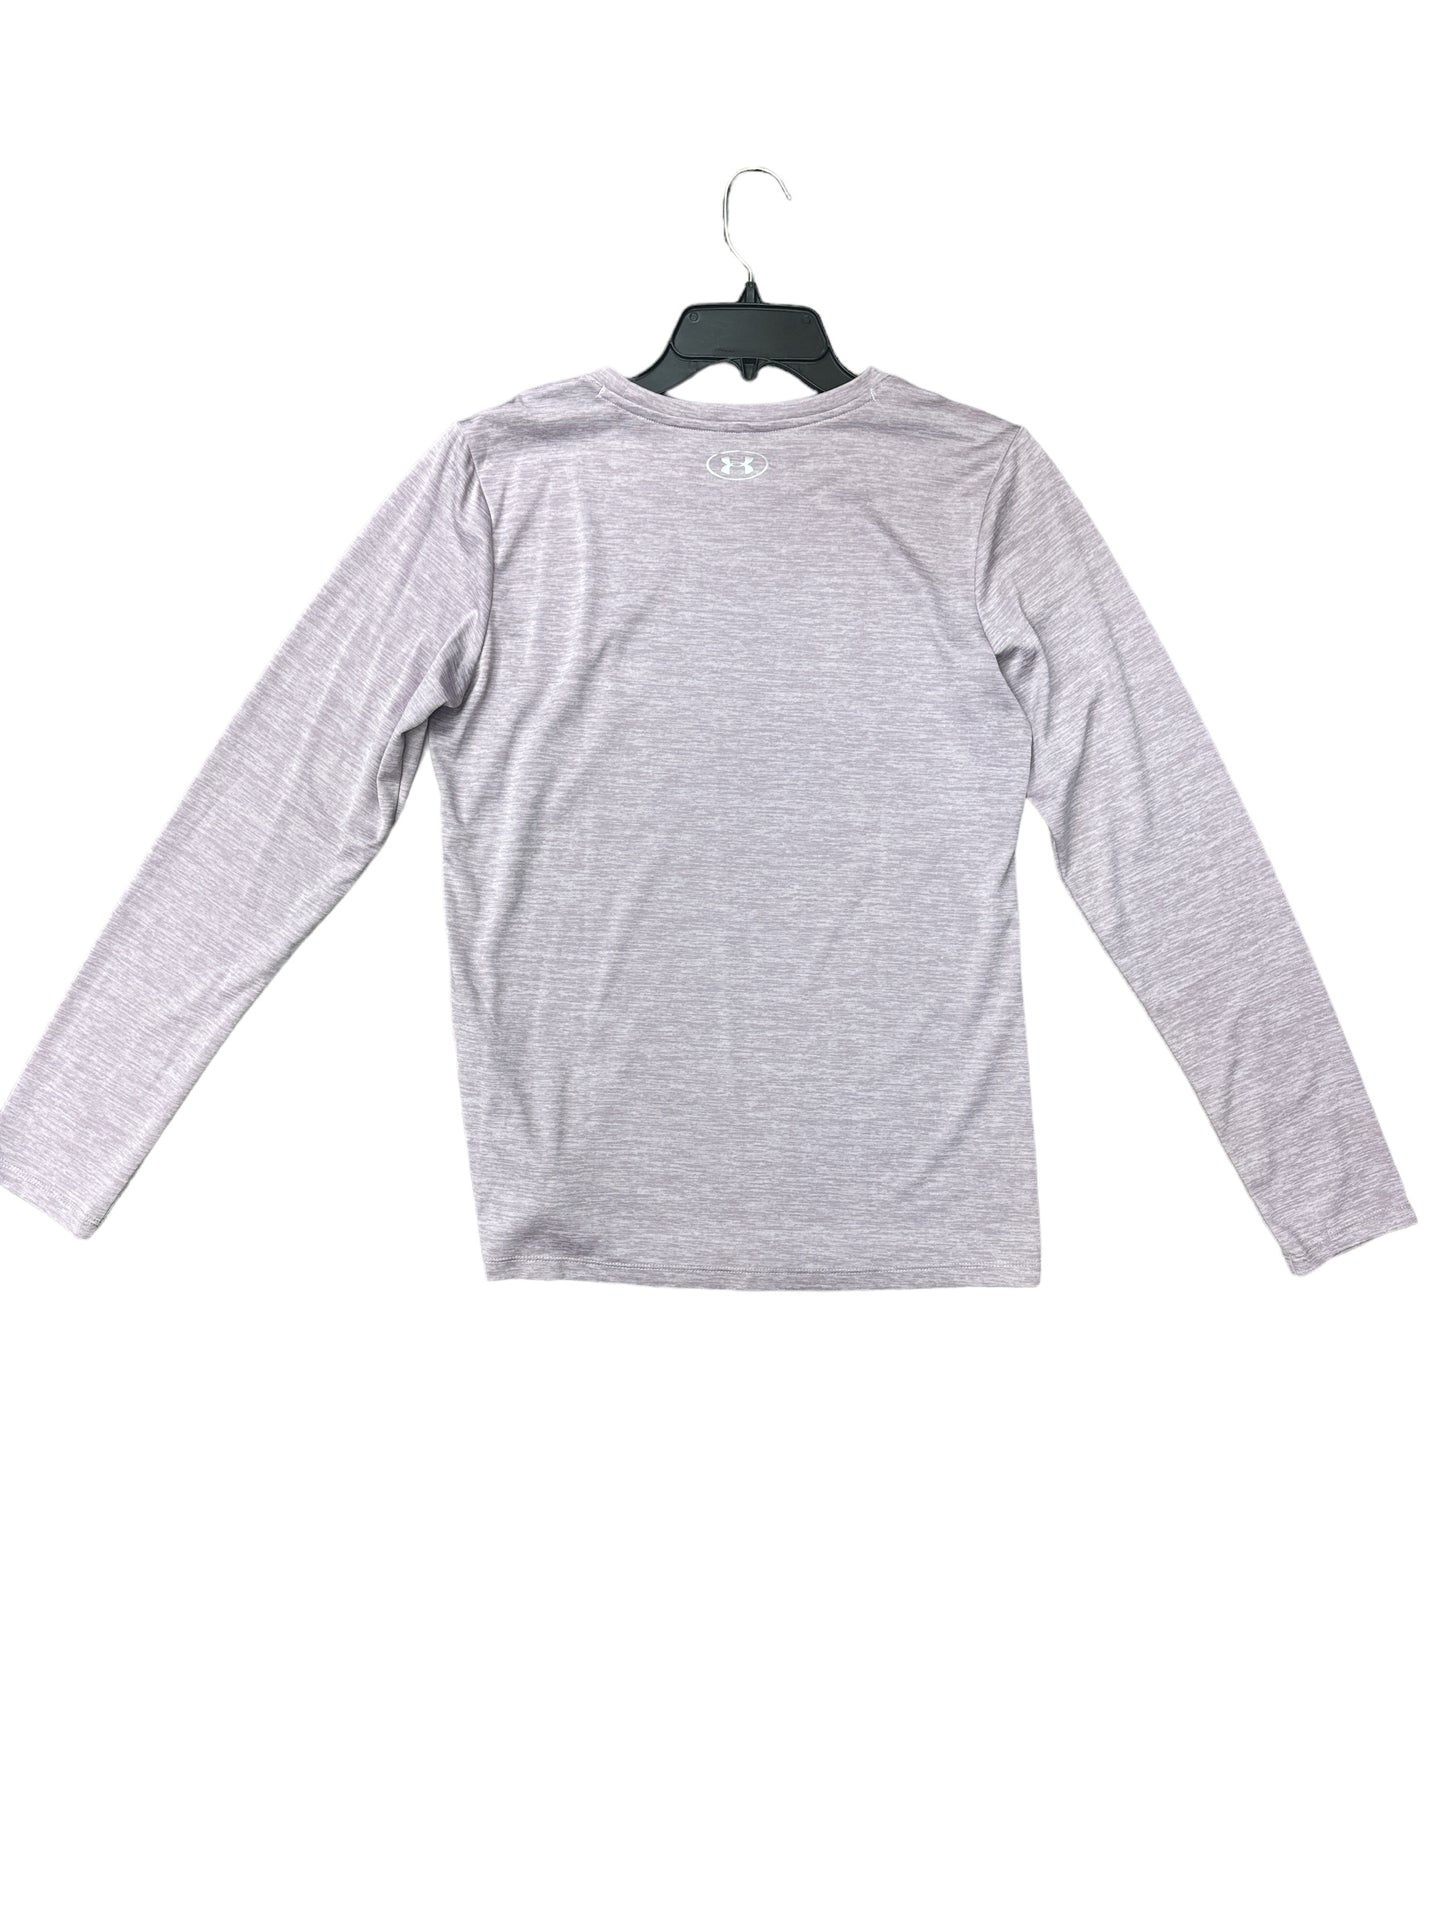 Athletic Top Long Sleeve Crewneck By Under Armour  Size: S